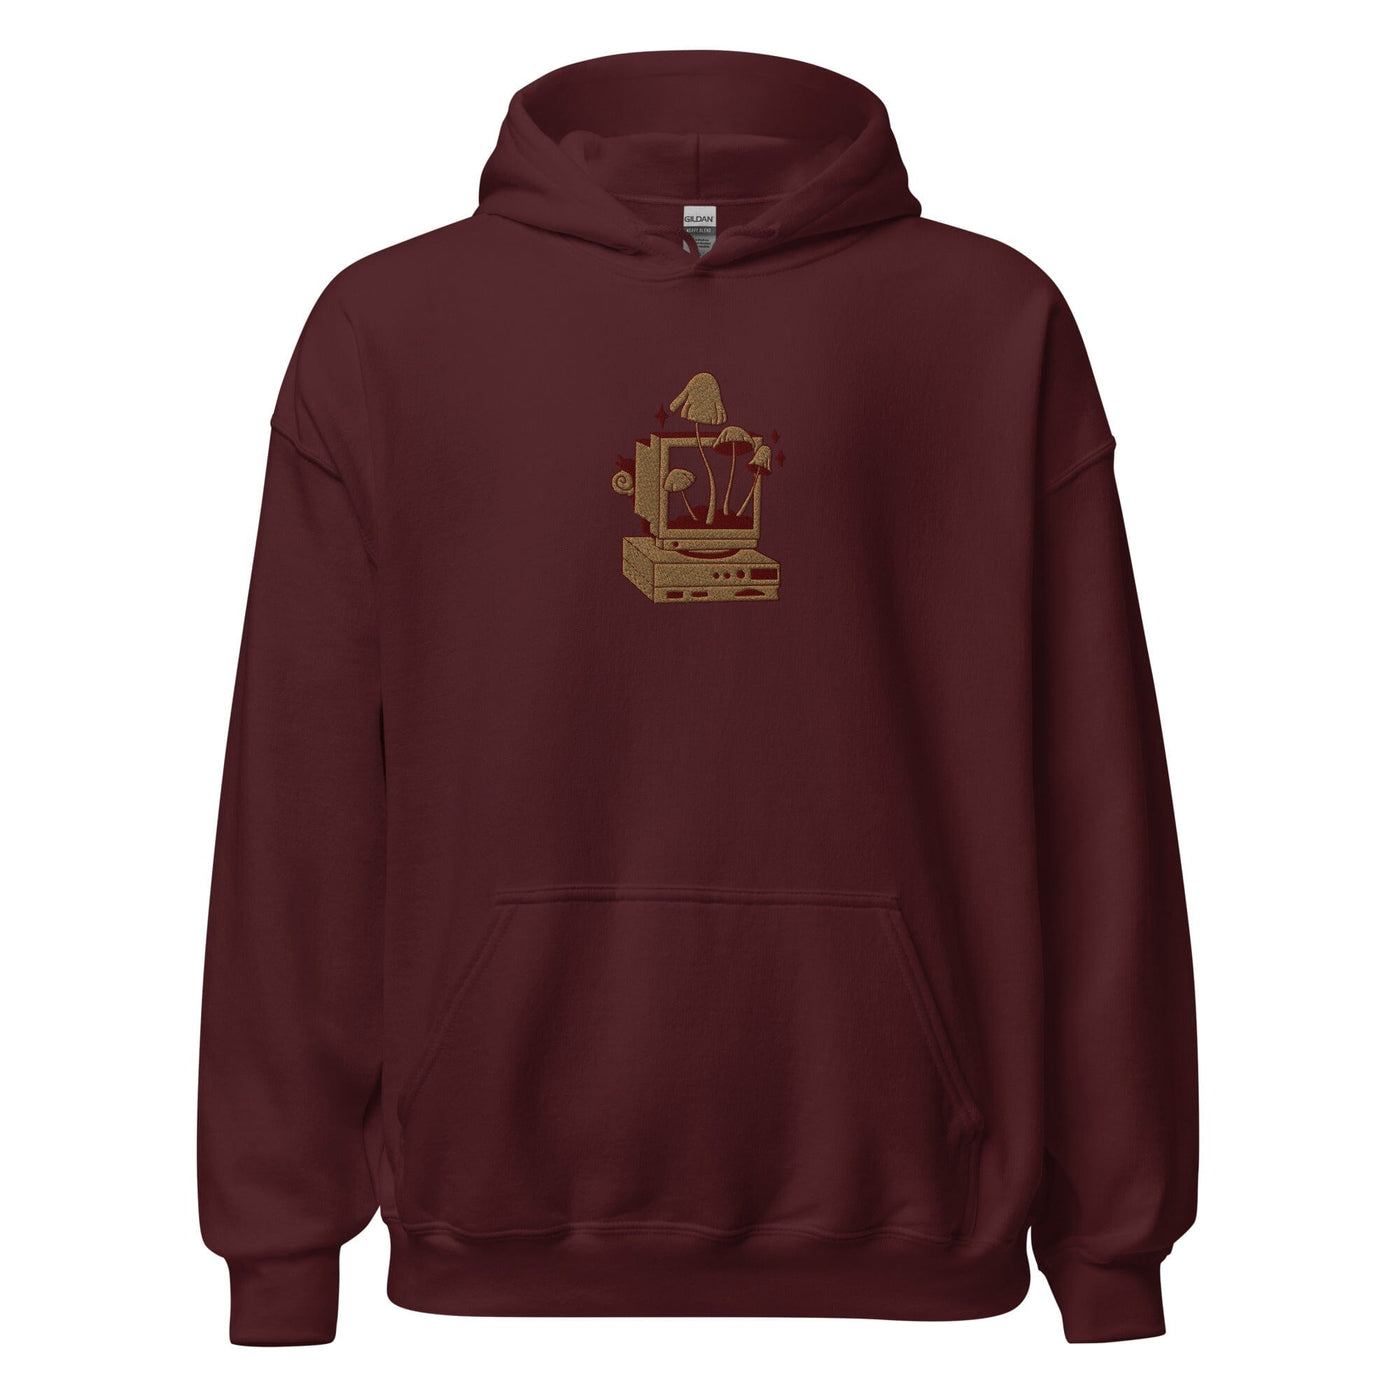 Cozy PC Gaming | Embroidered Unisex Hoodie | Cozy Gamer Threads & Thistles Inventory Maroon S 